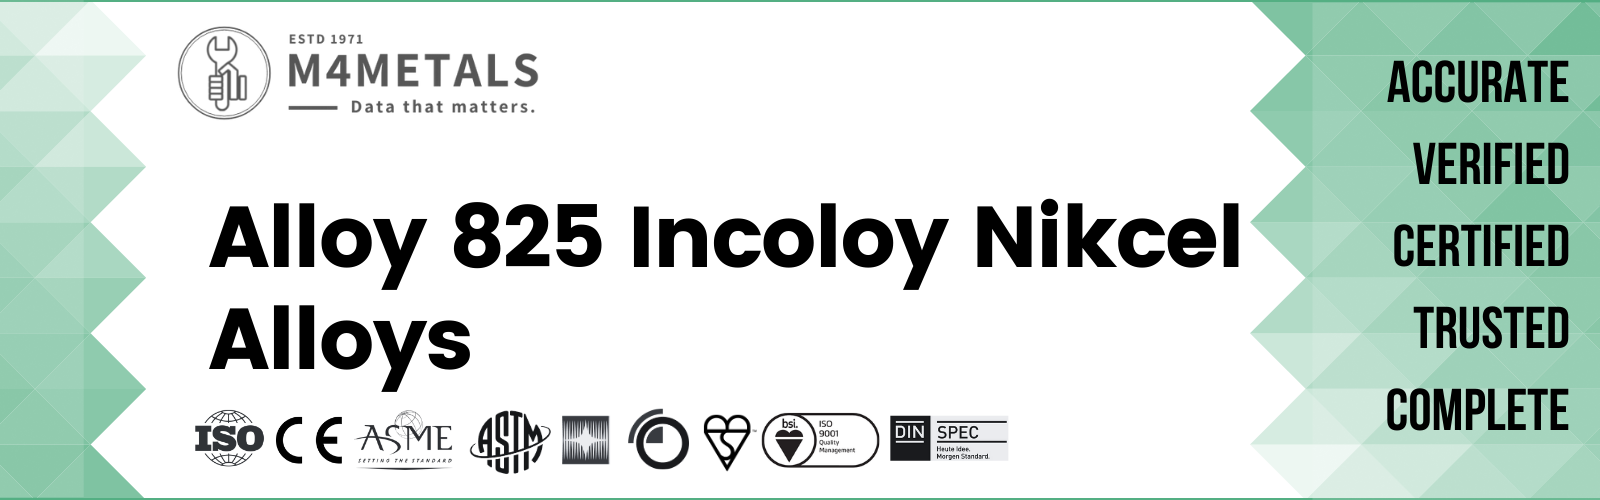 Incoloy Alloy 825